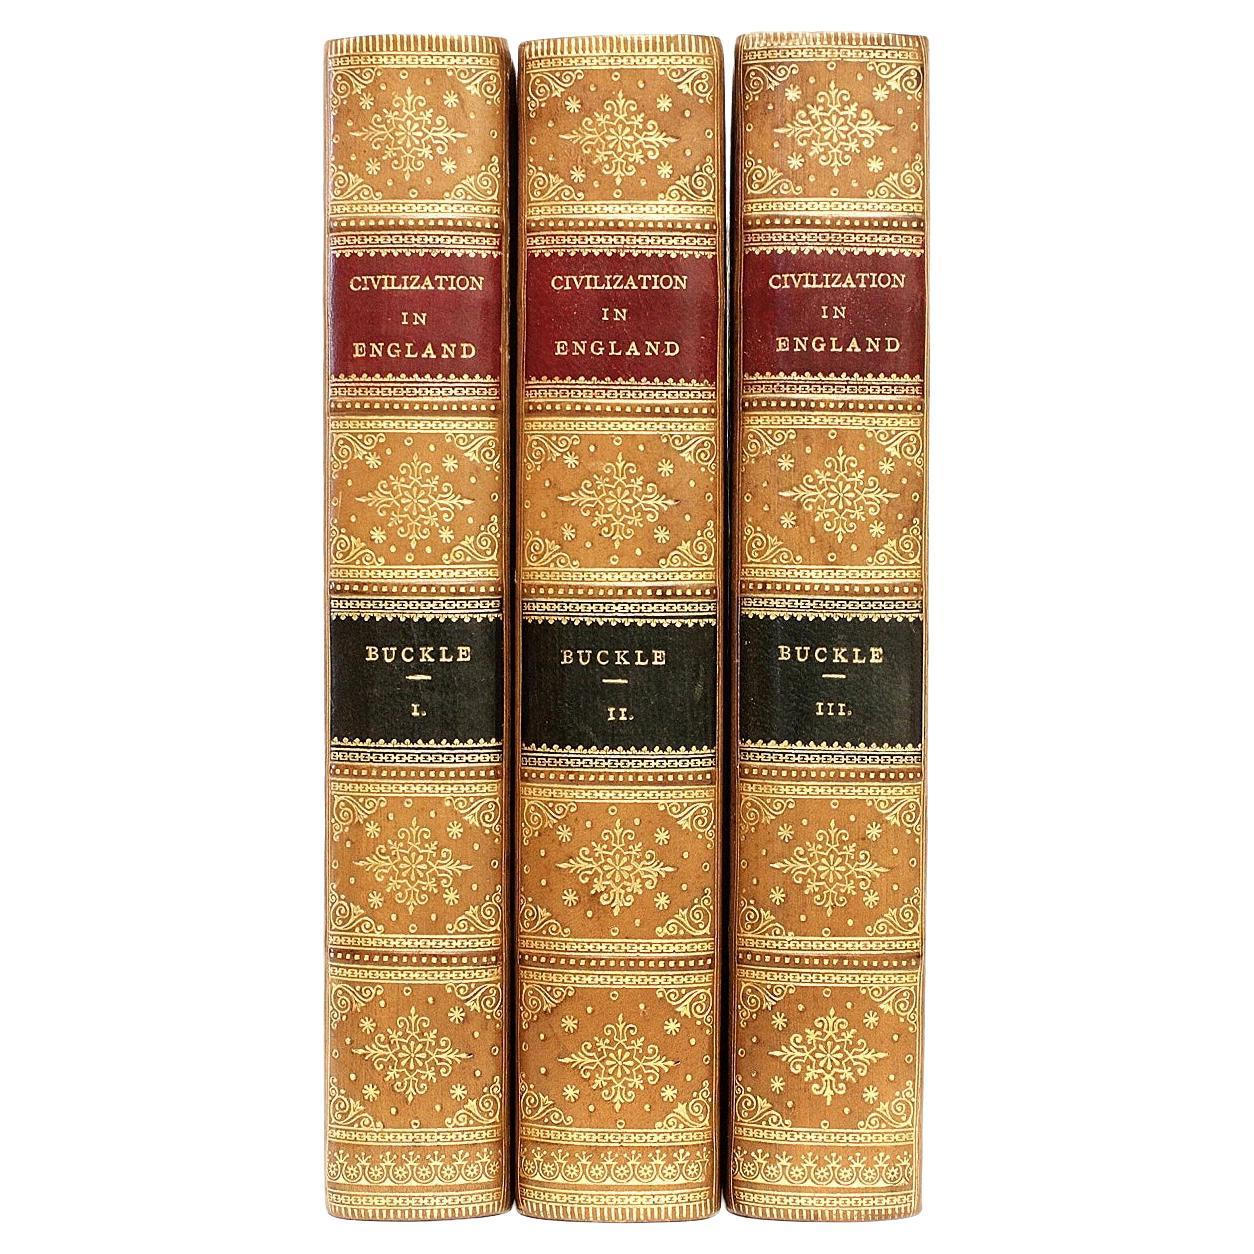 Buckle, History of Civilization In England, 3 Vols, In A Fine Leather Binding